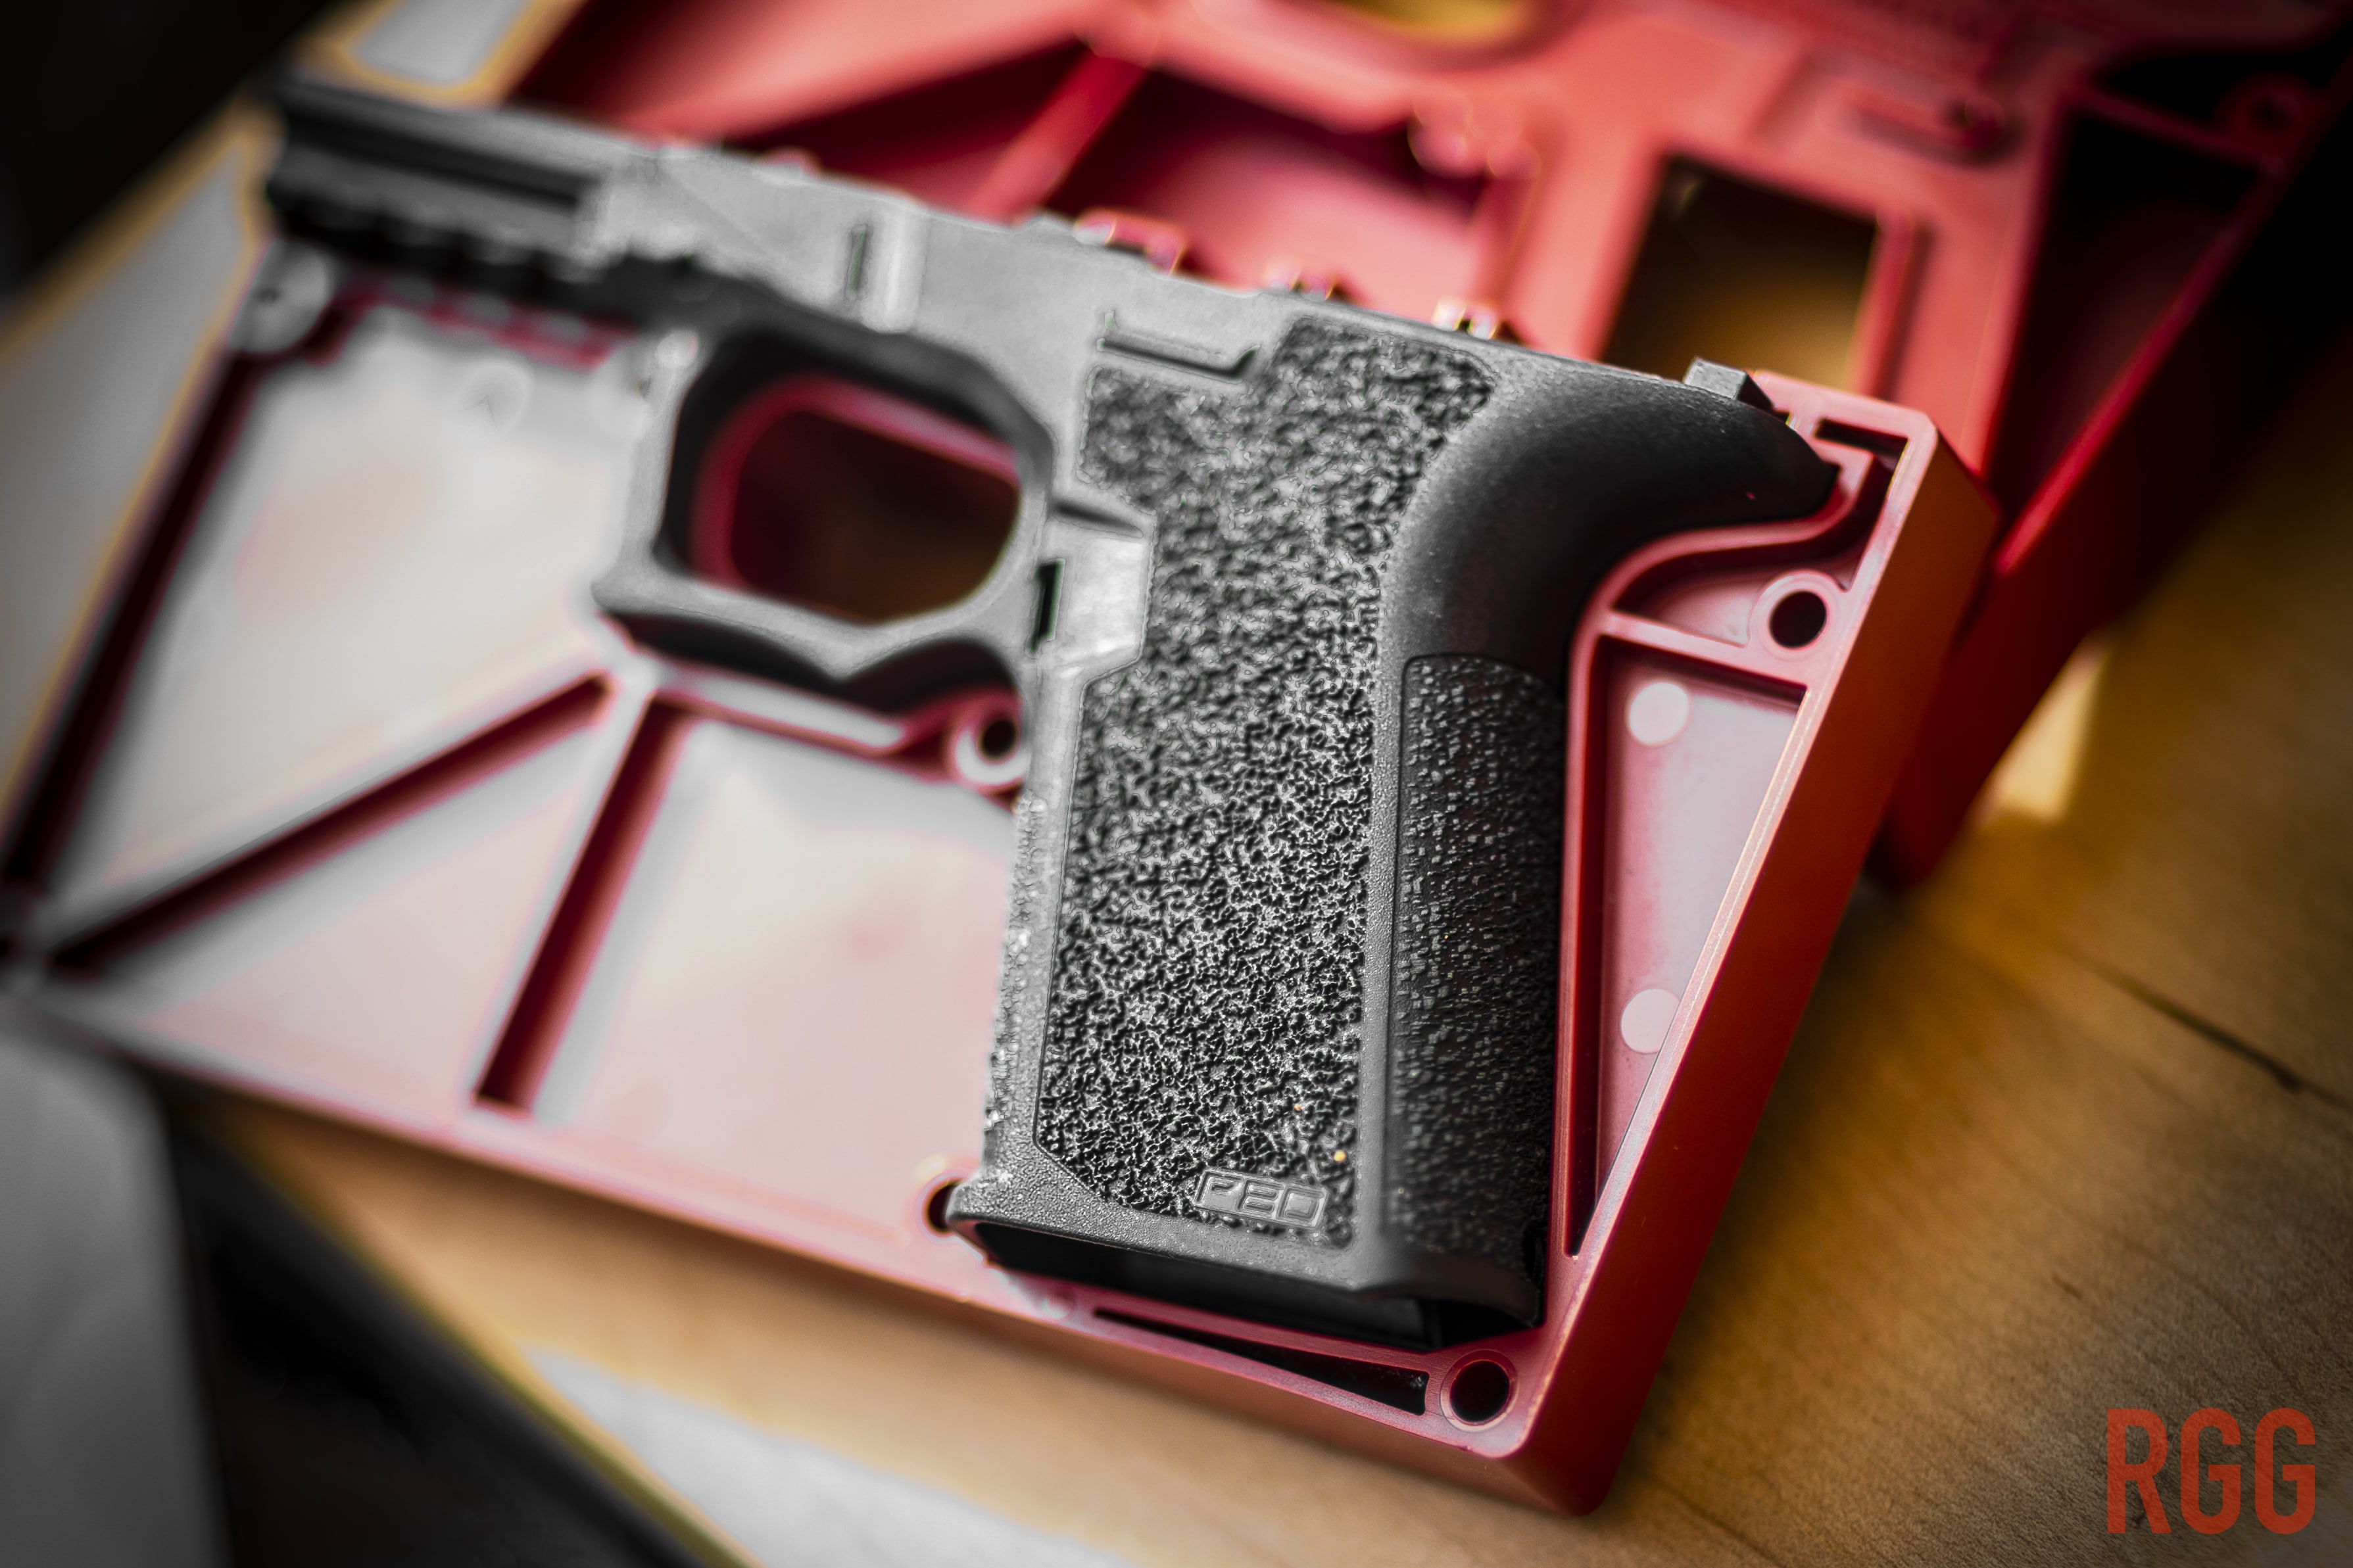 A Polymer80 G19-style 80 percent frame. This is not a firearm.